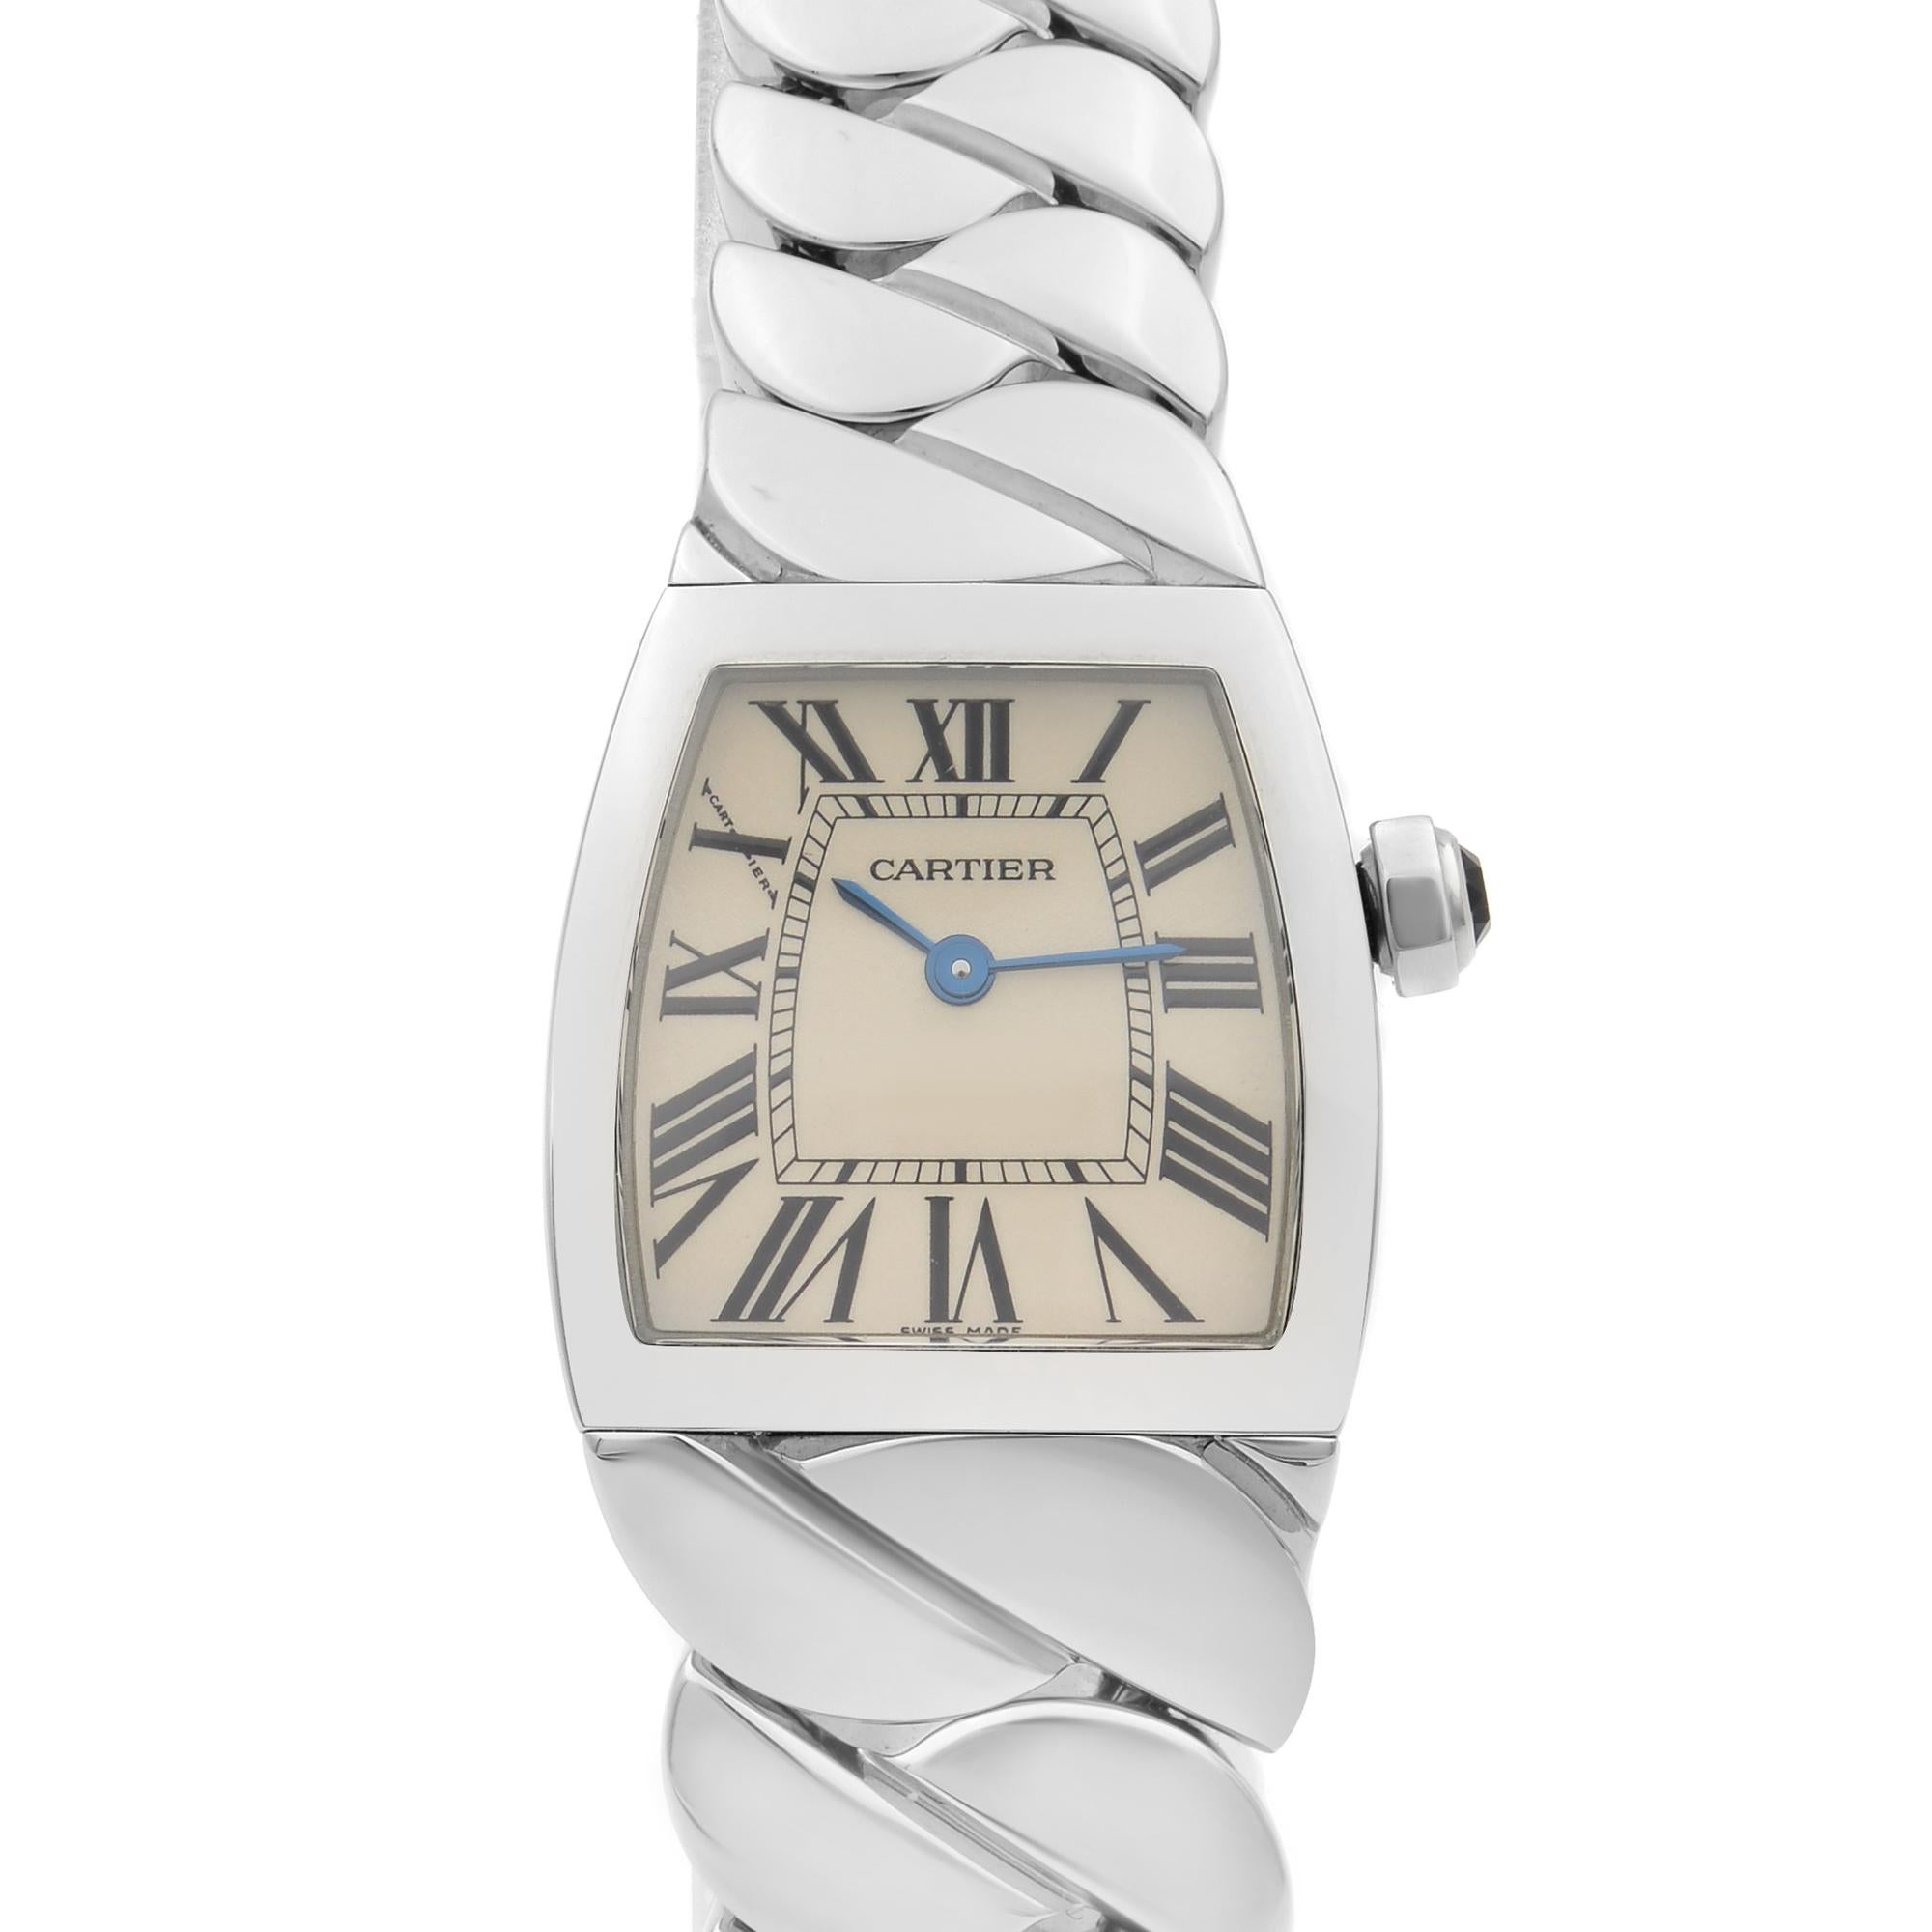 This pre-owned Cartier La Dona W660012I is a beautiful Ladie's timepiece that is powered by quartz (battery) movement which is cased in a stainless steel case. It has a rectangle shape face, no features dial and has hand roman numerals style